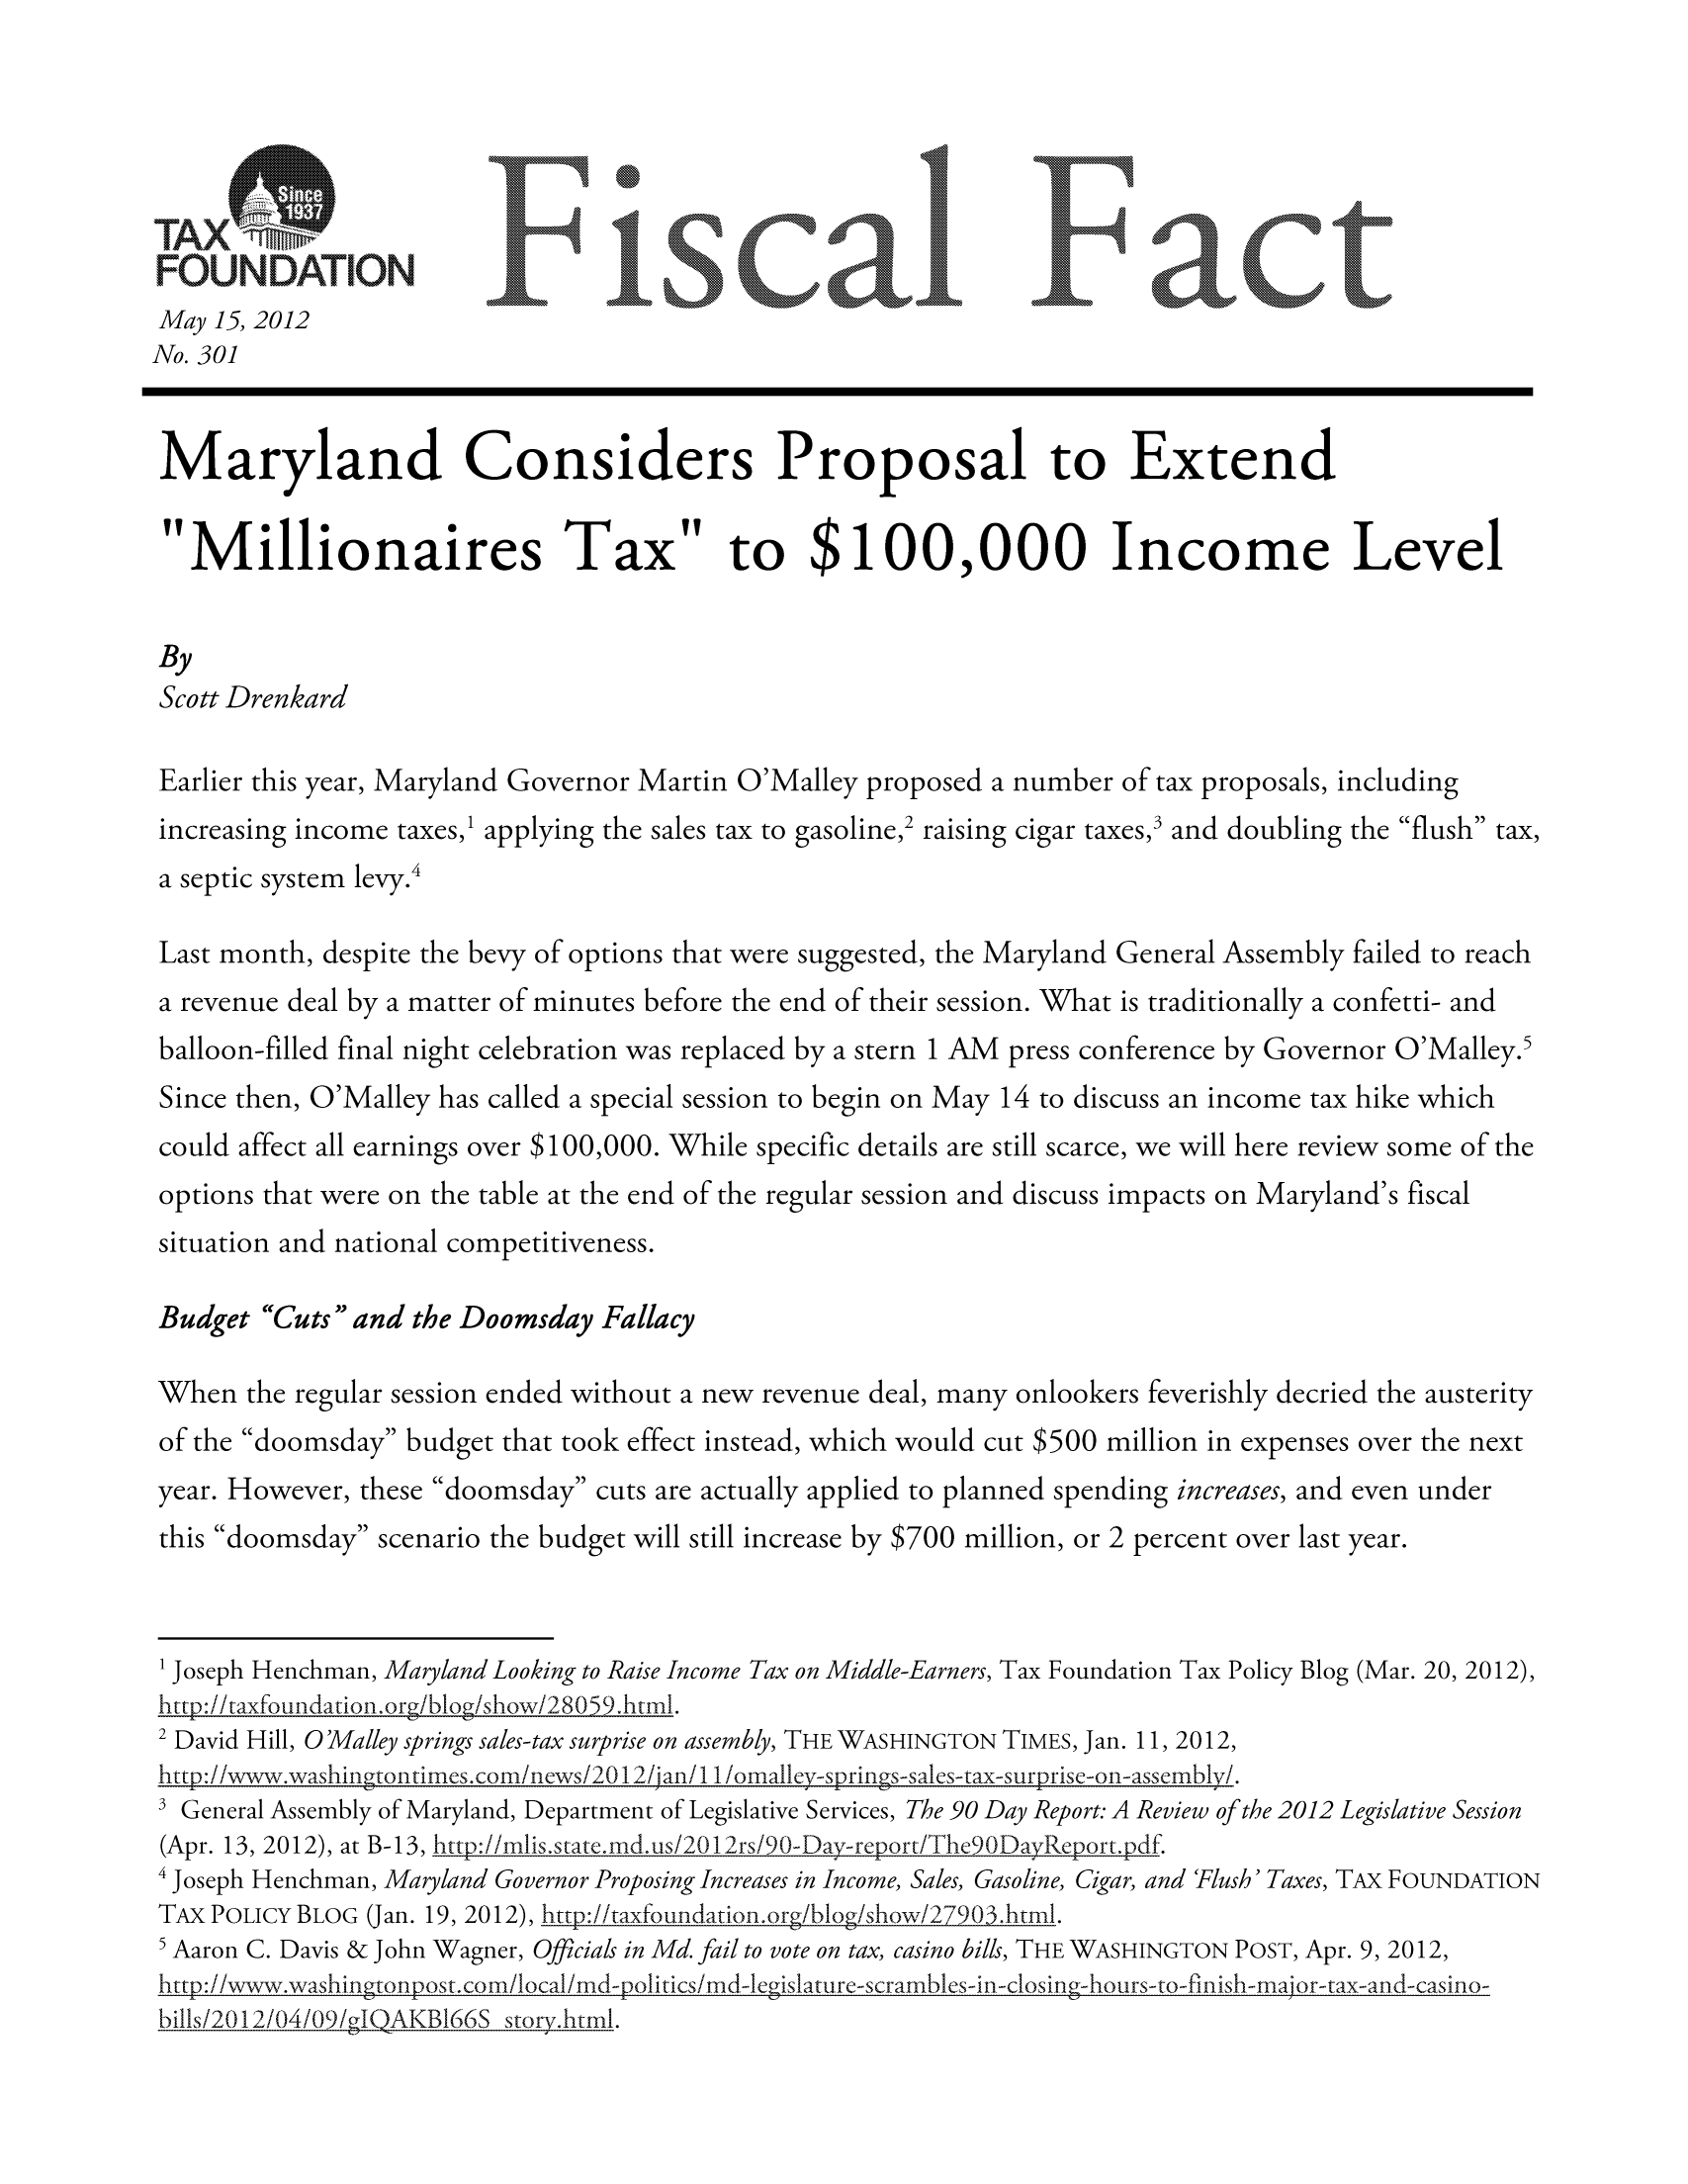 handle is hein.taxfoundation/ffdabxz0001 and id is 1 raw text is: FOUNDATION               ,                 calIoc
May 15, 2012
No. 301
Maryland Considers Proposal to Extend
Millionaires Tax to $100,000 Income Level
By
Scott Drenkard
Earlier this year, Maryland Governor Martin O'Malley proposed a number of tax proposals, including
increasing income taxes,1 applying the sales tax to gasoline,2 raising cigar taxes,3 and doubling the flush tax,
a septic system levy.4
Last month, despite the bevy of options that were suggested, the Maryland General Assembly failed to reach
a revenue deal by a matter of minutes before the end of their session. What is traditionally a confetti- and
balloon-filled final night celebration was replaced by a stern 1 AM press conference by Governor O'Malley.5
Since then, O'Malley has called a special session to begin on May 14 to discuss an income tax hike which
could affect all earnings over $100,000. While specific details are still scarce, we will here review some of the
options that were on the table at the end of the regular session and discuss impacts on Maryland's fiscal
situation and national competitiveness.
Budget Cuts and the Doomsday Fallacy
When the regular session ended without a new revenue deal, many onlookers feverishly decried the austerity
of the doomsday budget that took effect instead, which would cut $500 million in expenses over the next
year. However, these doomsday cuts are actually applied to planned spending increases, and even under
this doomsday scenario the budget will still increase by $700 million, or 2 percent over last year.
1 Joseph Henchman, Ma ryland Looking to Raise Income Tax on Middle-Earners, Tax Foundation Tax Policy Blog (Mar. 20, 2012),
http:!itaxfoundationorgblogishowi2805 9htmnl.
2 David Hill, 0O'Malley springs sales-tax surprise on assembly, THE WASHINGTON TIMES, Jan. 11, 2012,
http://wwwvwashingtontimes comnews/20 12/jan/i/omnalkey -springs-sales-tax-surprise-on-assembly/.
SGeneral Assembly of Maryland, Department of Legislative Services, The 90 Day Report: A Review of the 2012 Legislative Session
(Apr. 13, 2012), at B- 13, http://mnlis.state.mnd us/20 12rs/90-Day-rcport/The90DayReport.pdf.
4 osp Henchman, Maryland Governor Proposing Increases in Income, Sales, Gasoline, Cigar, and 'Flush' Taxes, TAX FOUNDATION
TA POLICY BLOG (Jan. 19, 2012), http://tamfoundationorgblogshowx/2790 3.btml.
5Aaron C. Davis & John Wagner, Officials in Md. fail to vote on tax, casino bills, THE WASHINGTON POST, Apr. 9, 2012,

http://w-A-.wa.shingtonpost. com/local/md-politics/md-Iegislature-scrambles-in-closing-hours-to-finmish-major-tax-an d-casino-
bills/2012/04/09/pJQAKBI66S story.ltml.


